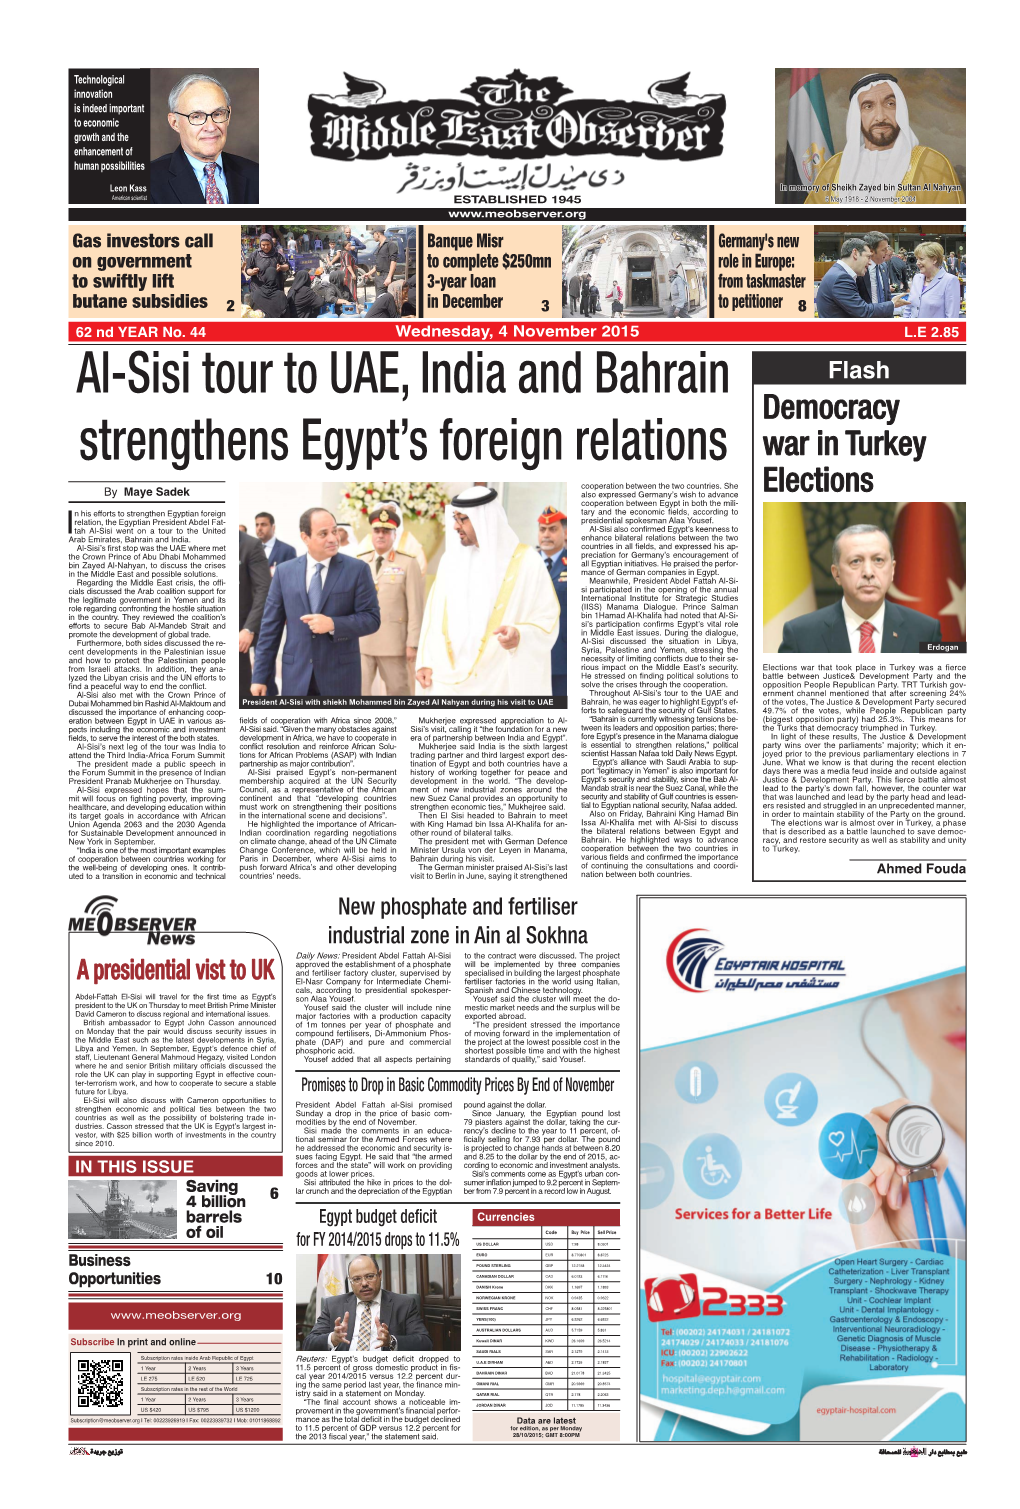 Al-Sisi Tour to UAE, India and Bahrain Strengthens Egypt's Foreign Relations